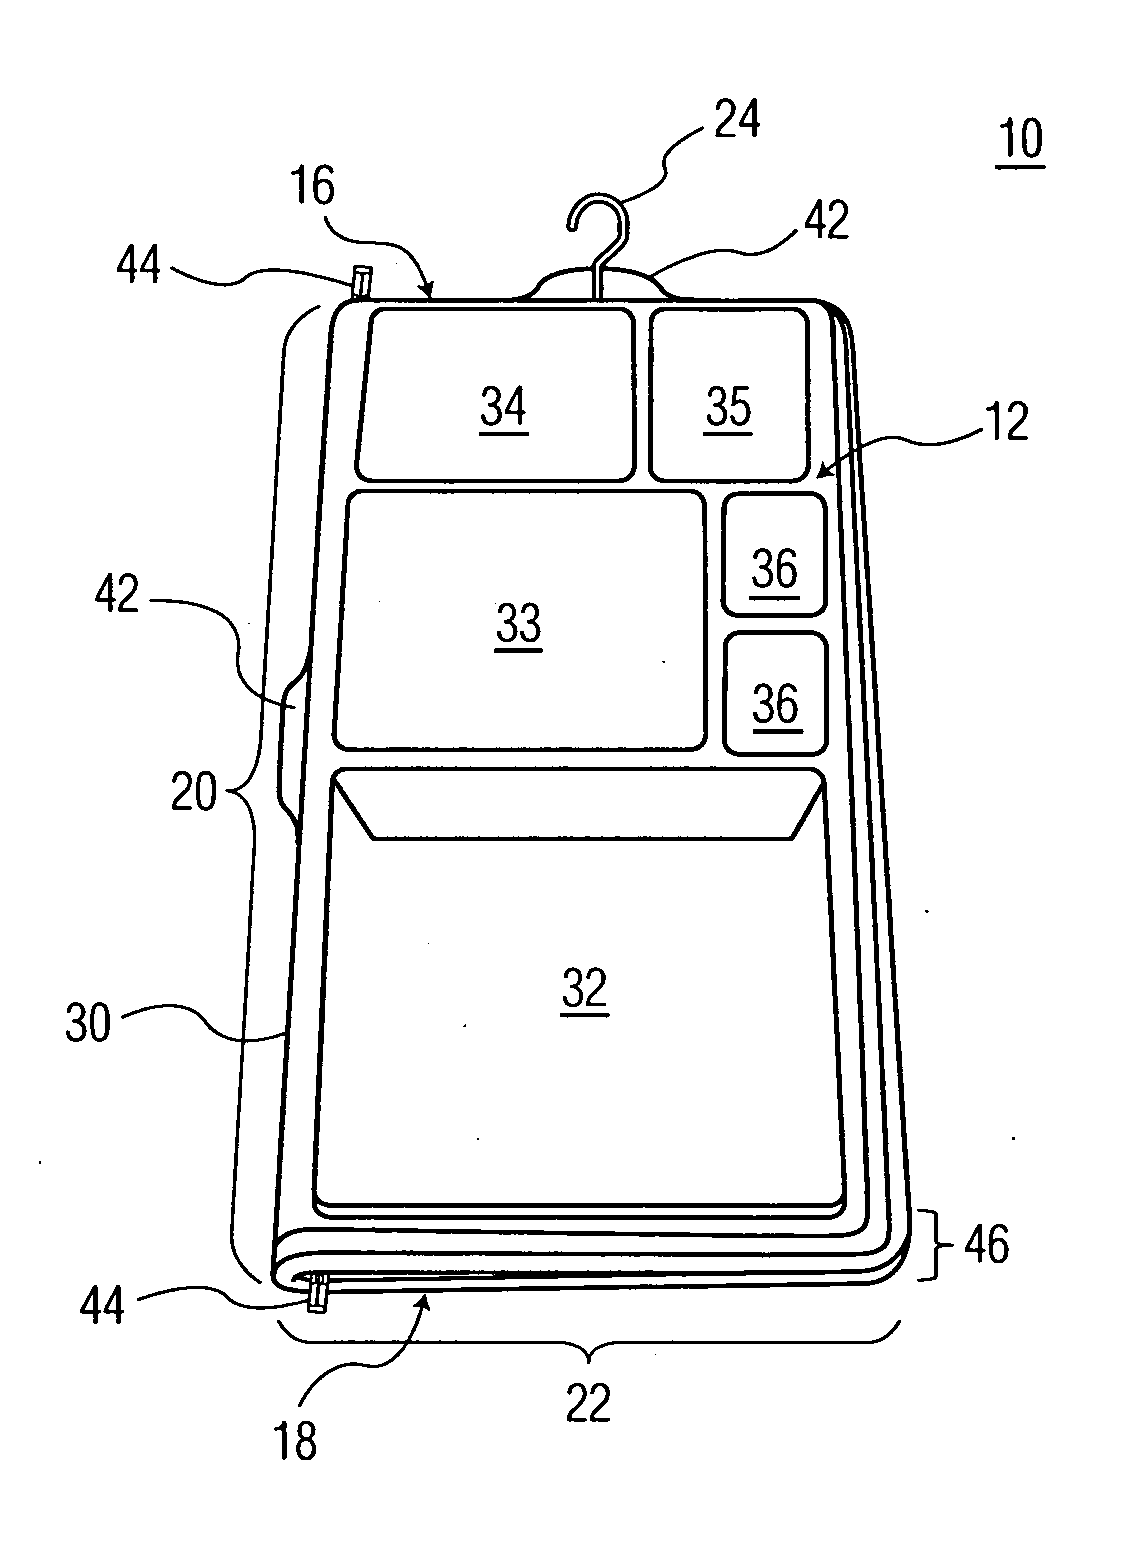 Storage device and system for gift wrapping